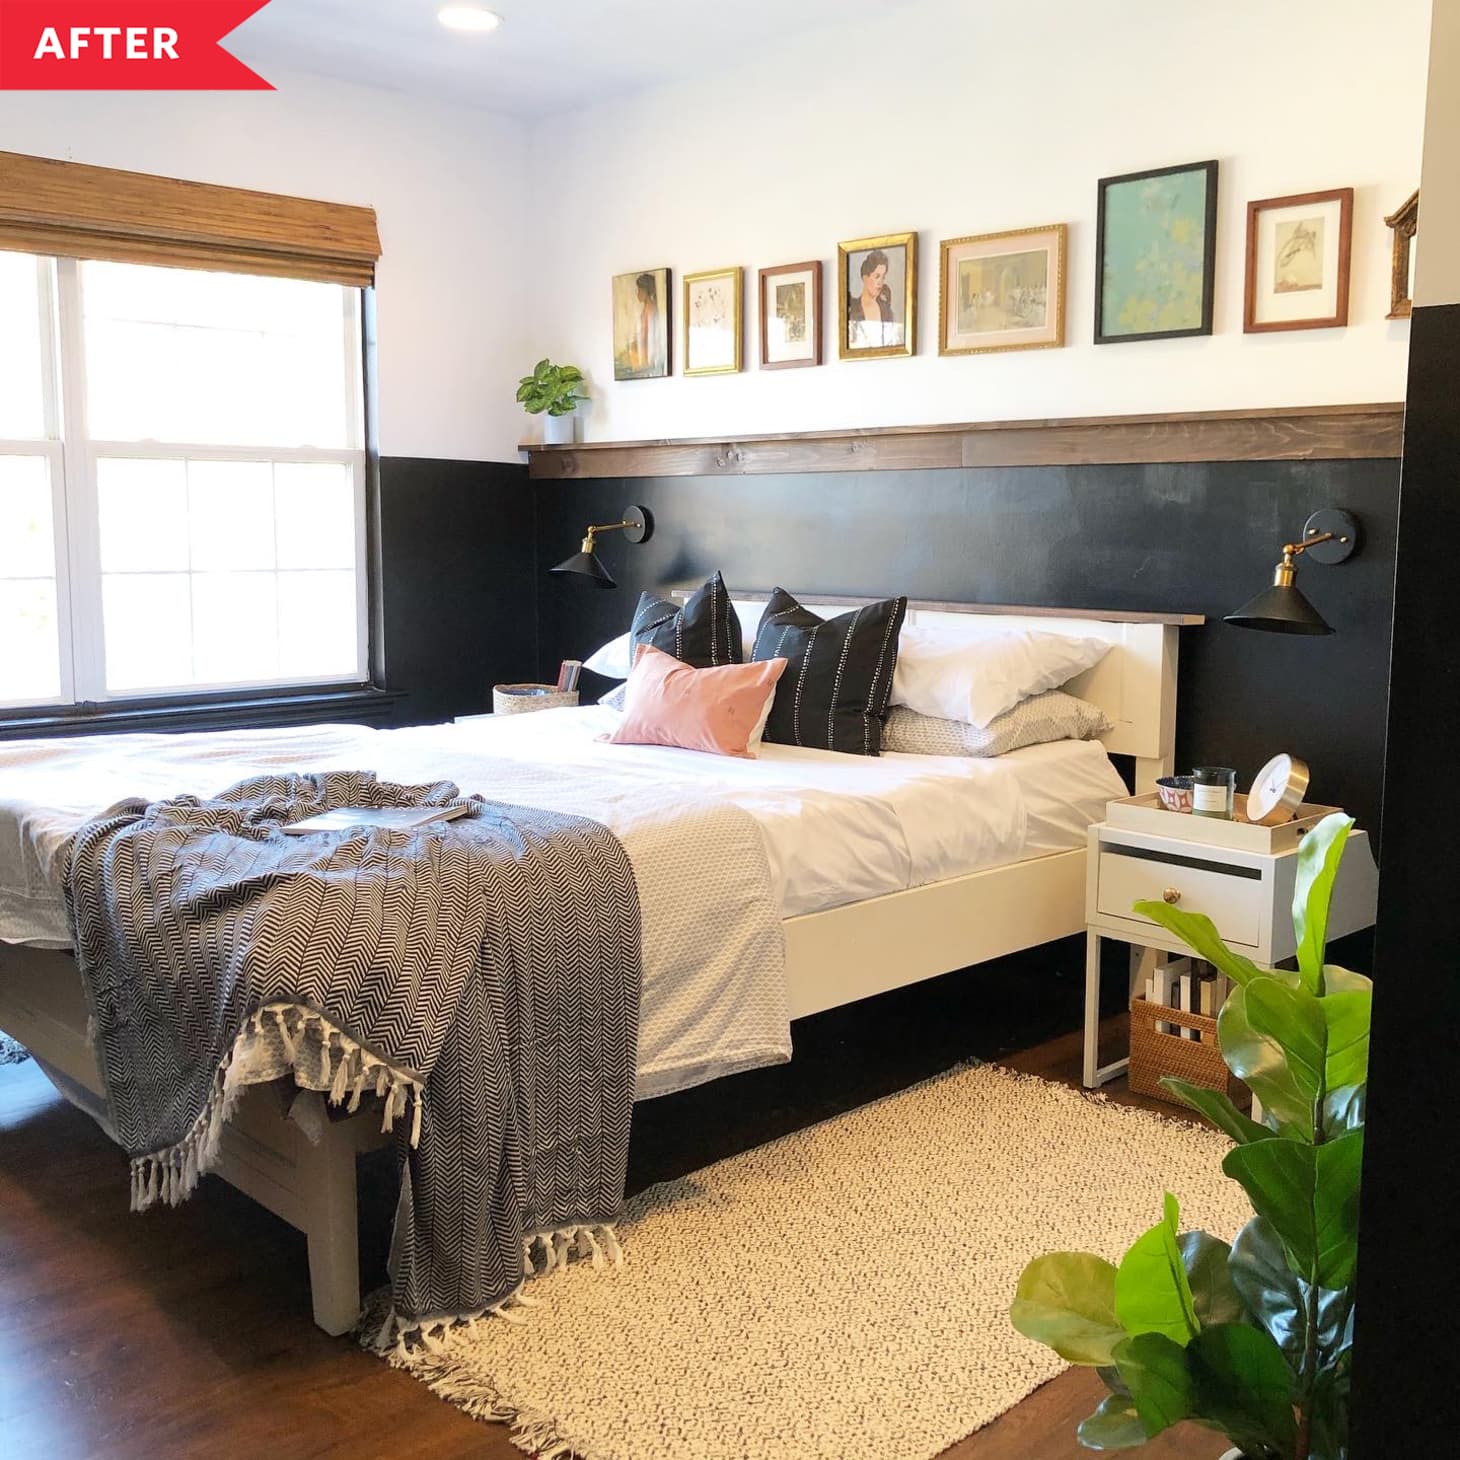 Black Bedroom Redo Before And After Bedroom Office